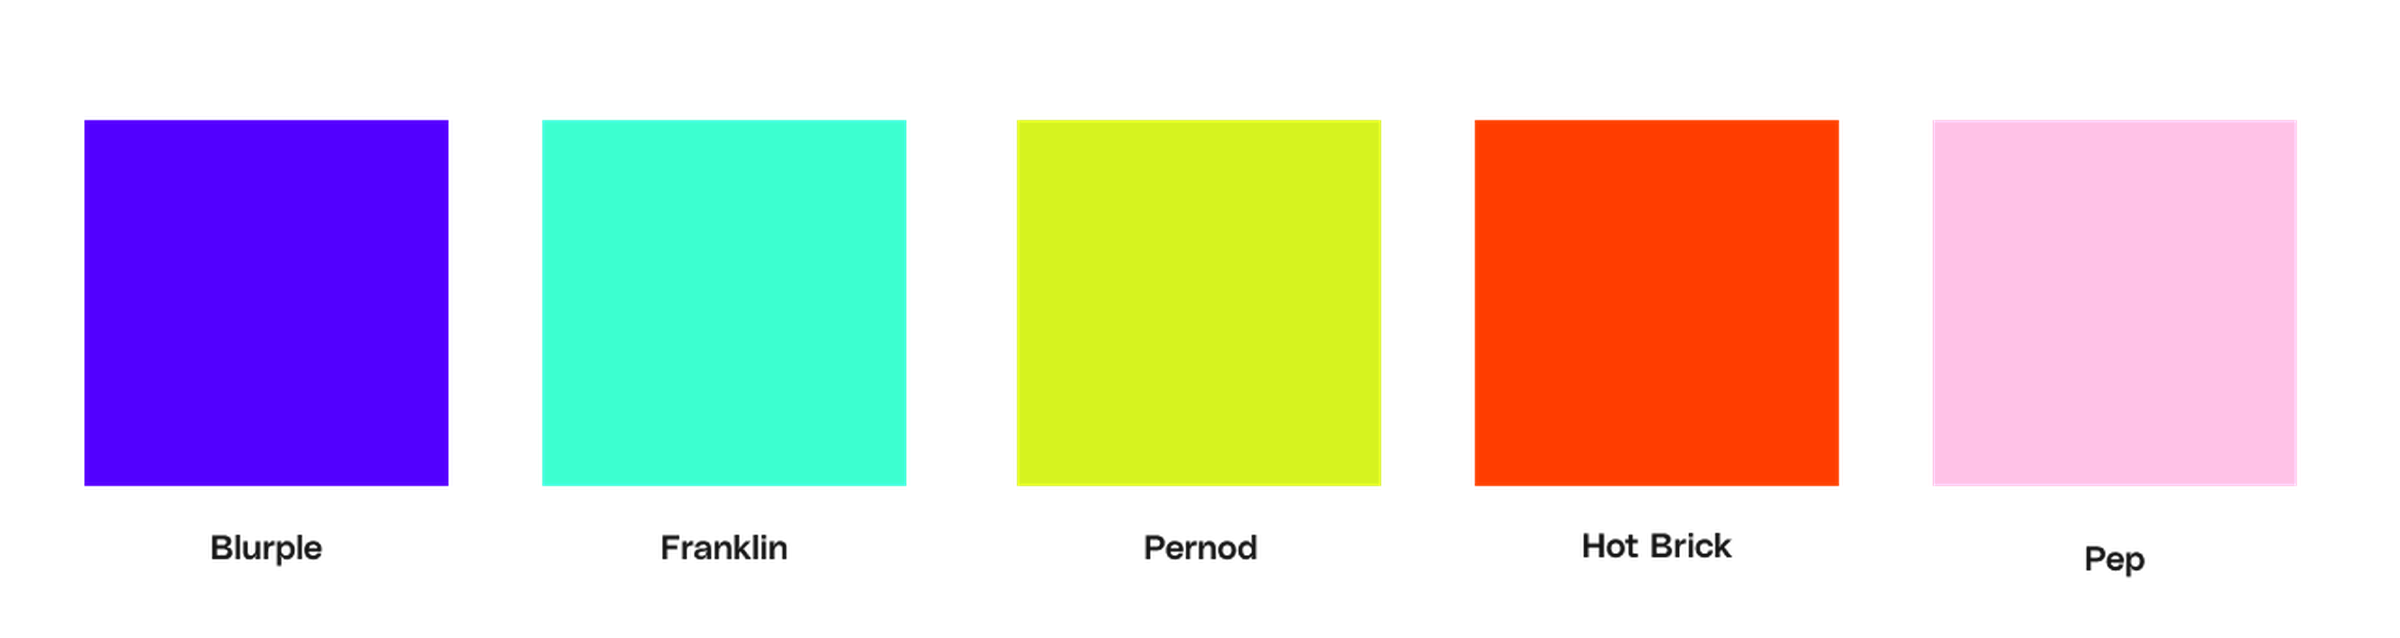 Five squares showing colors: purple, teal, yellow, red, and pink.